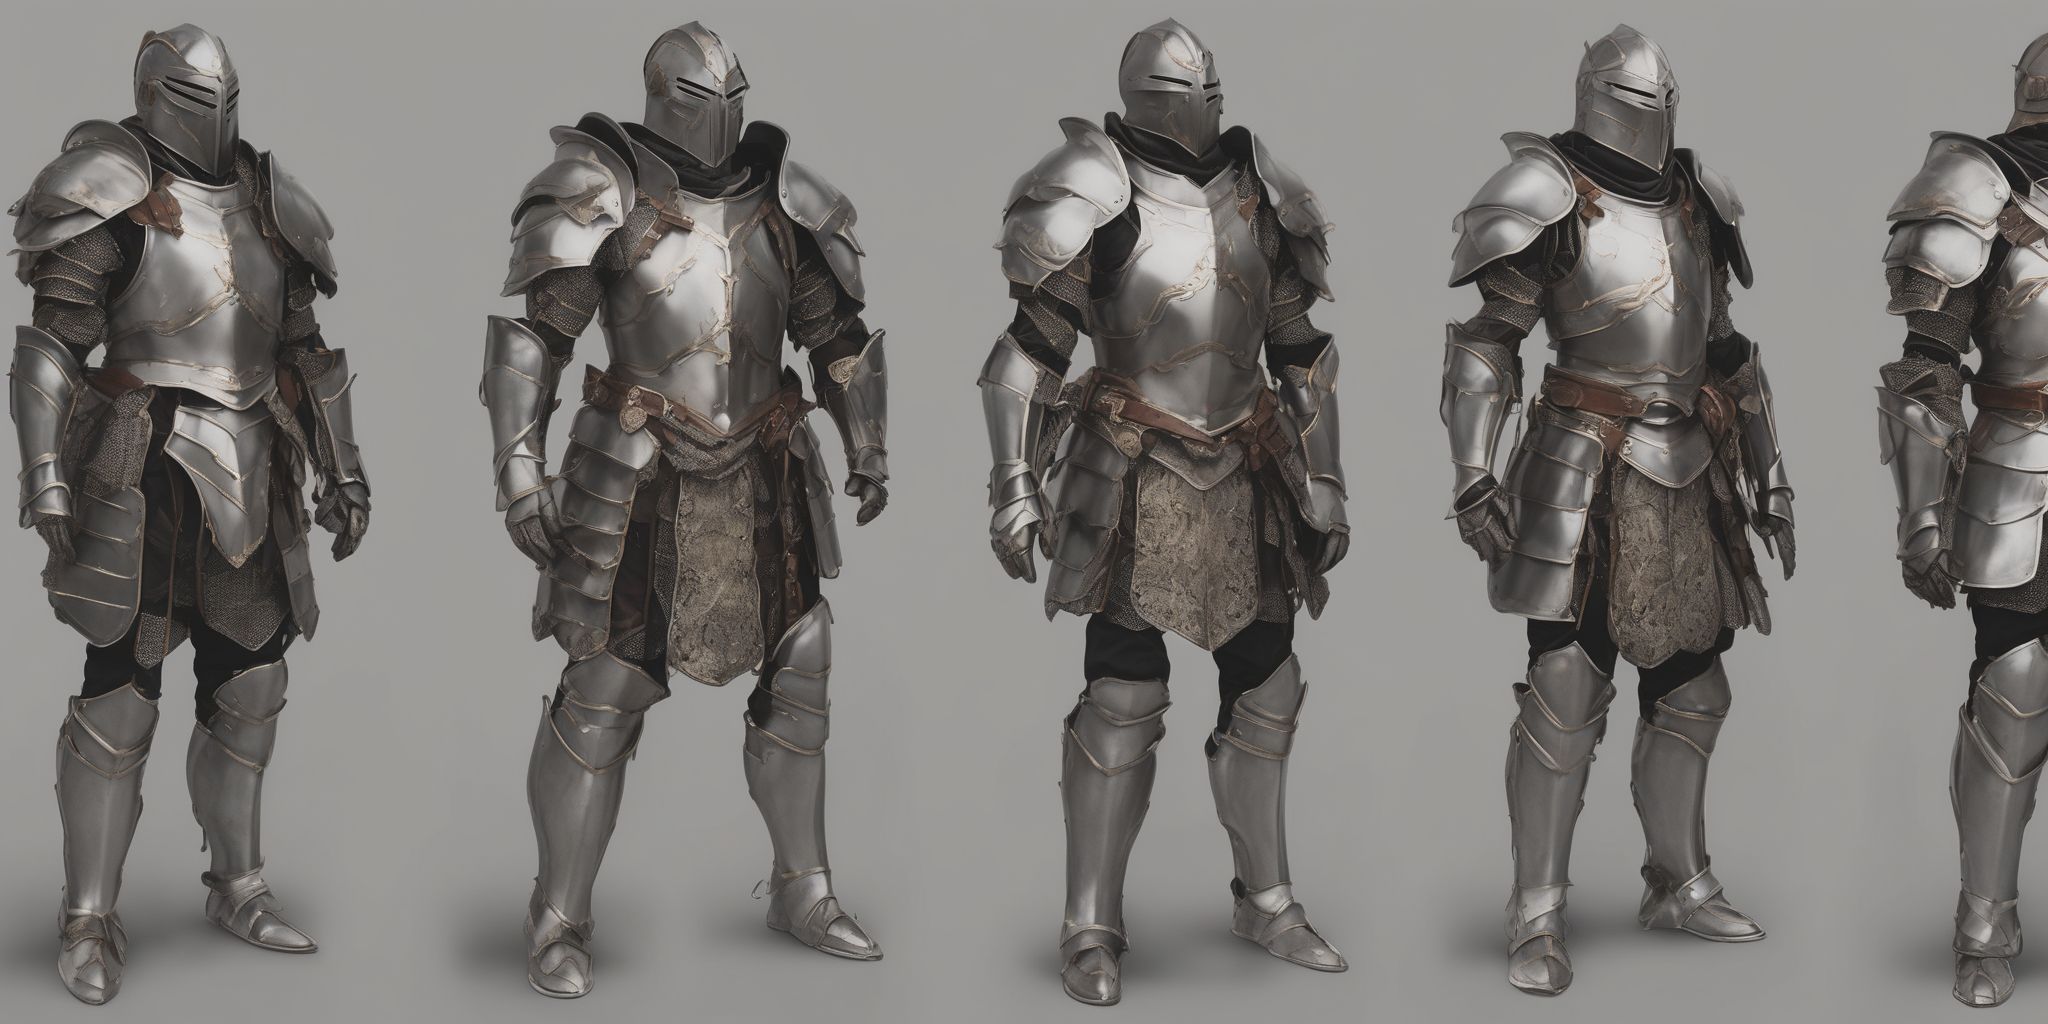 Armor  in realistic, photographic style